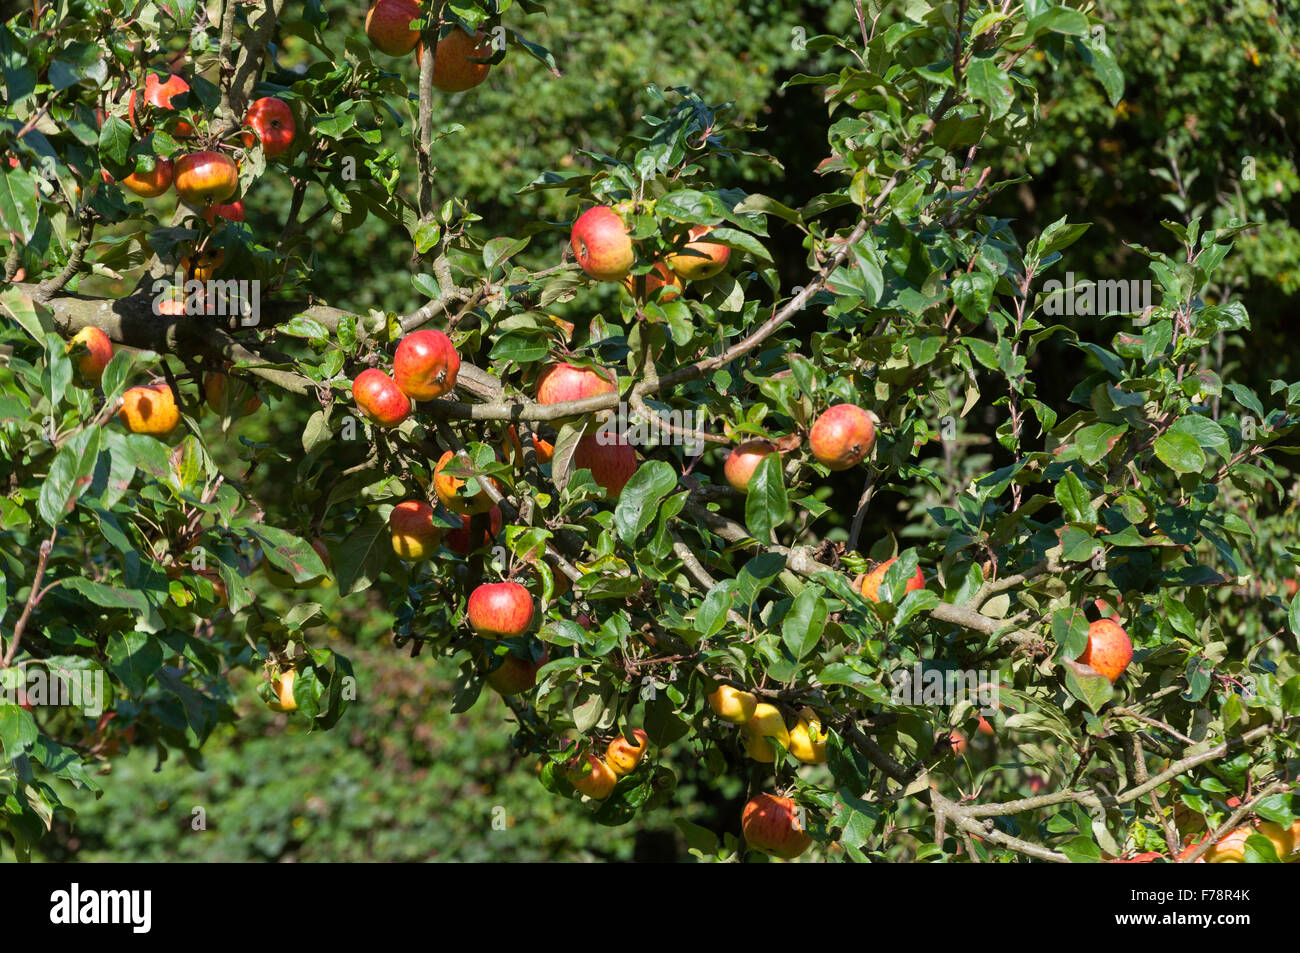 Apple orchard, Chiltern Open Air Museum, Chalfont St Giles Buckinghamshire, England, United Kingdom Stock Photo